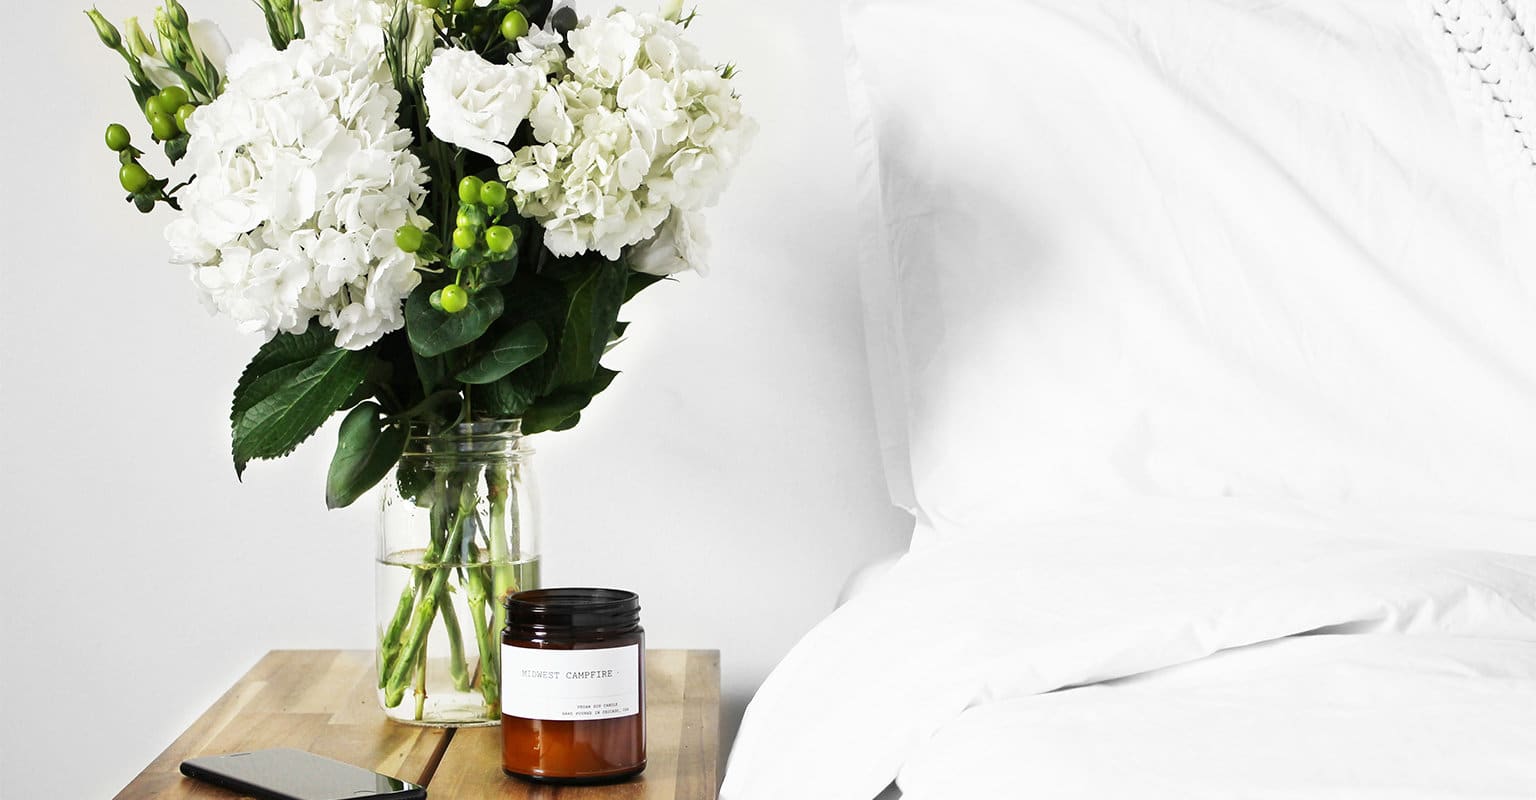 Bright white bedding and wooden bedside table with vase of white flowers, candle and cell phone.